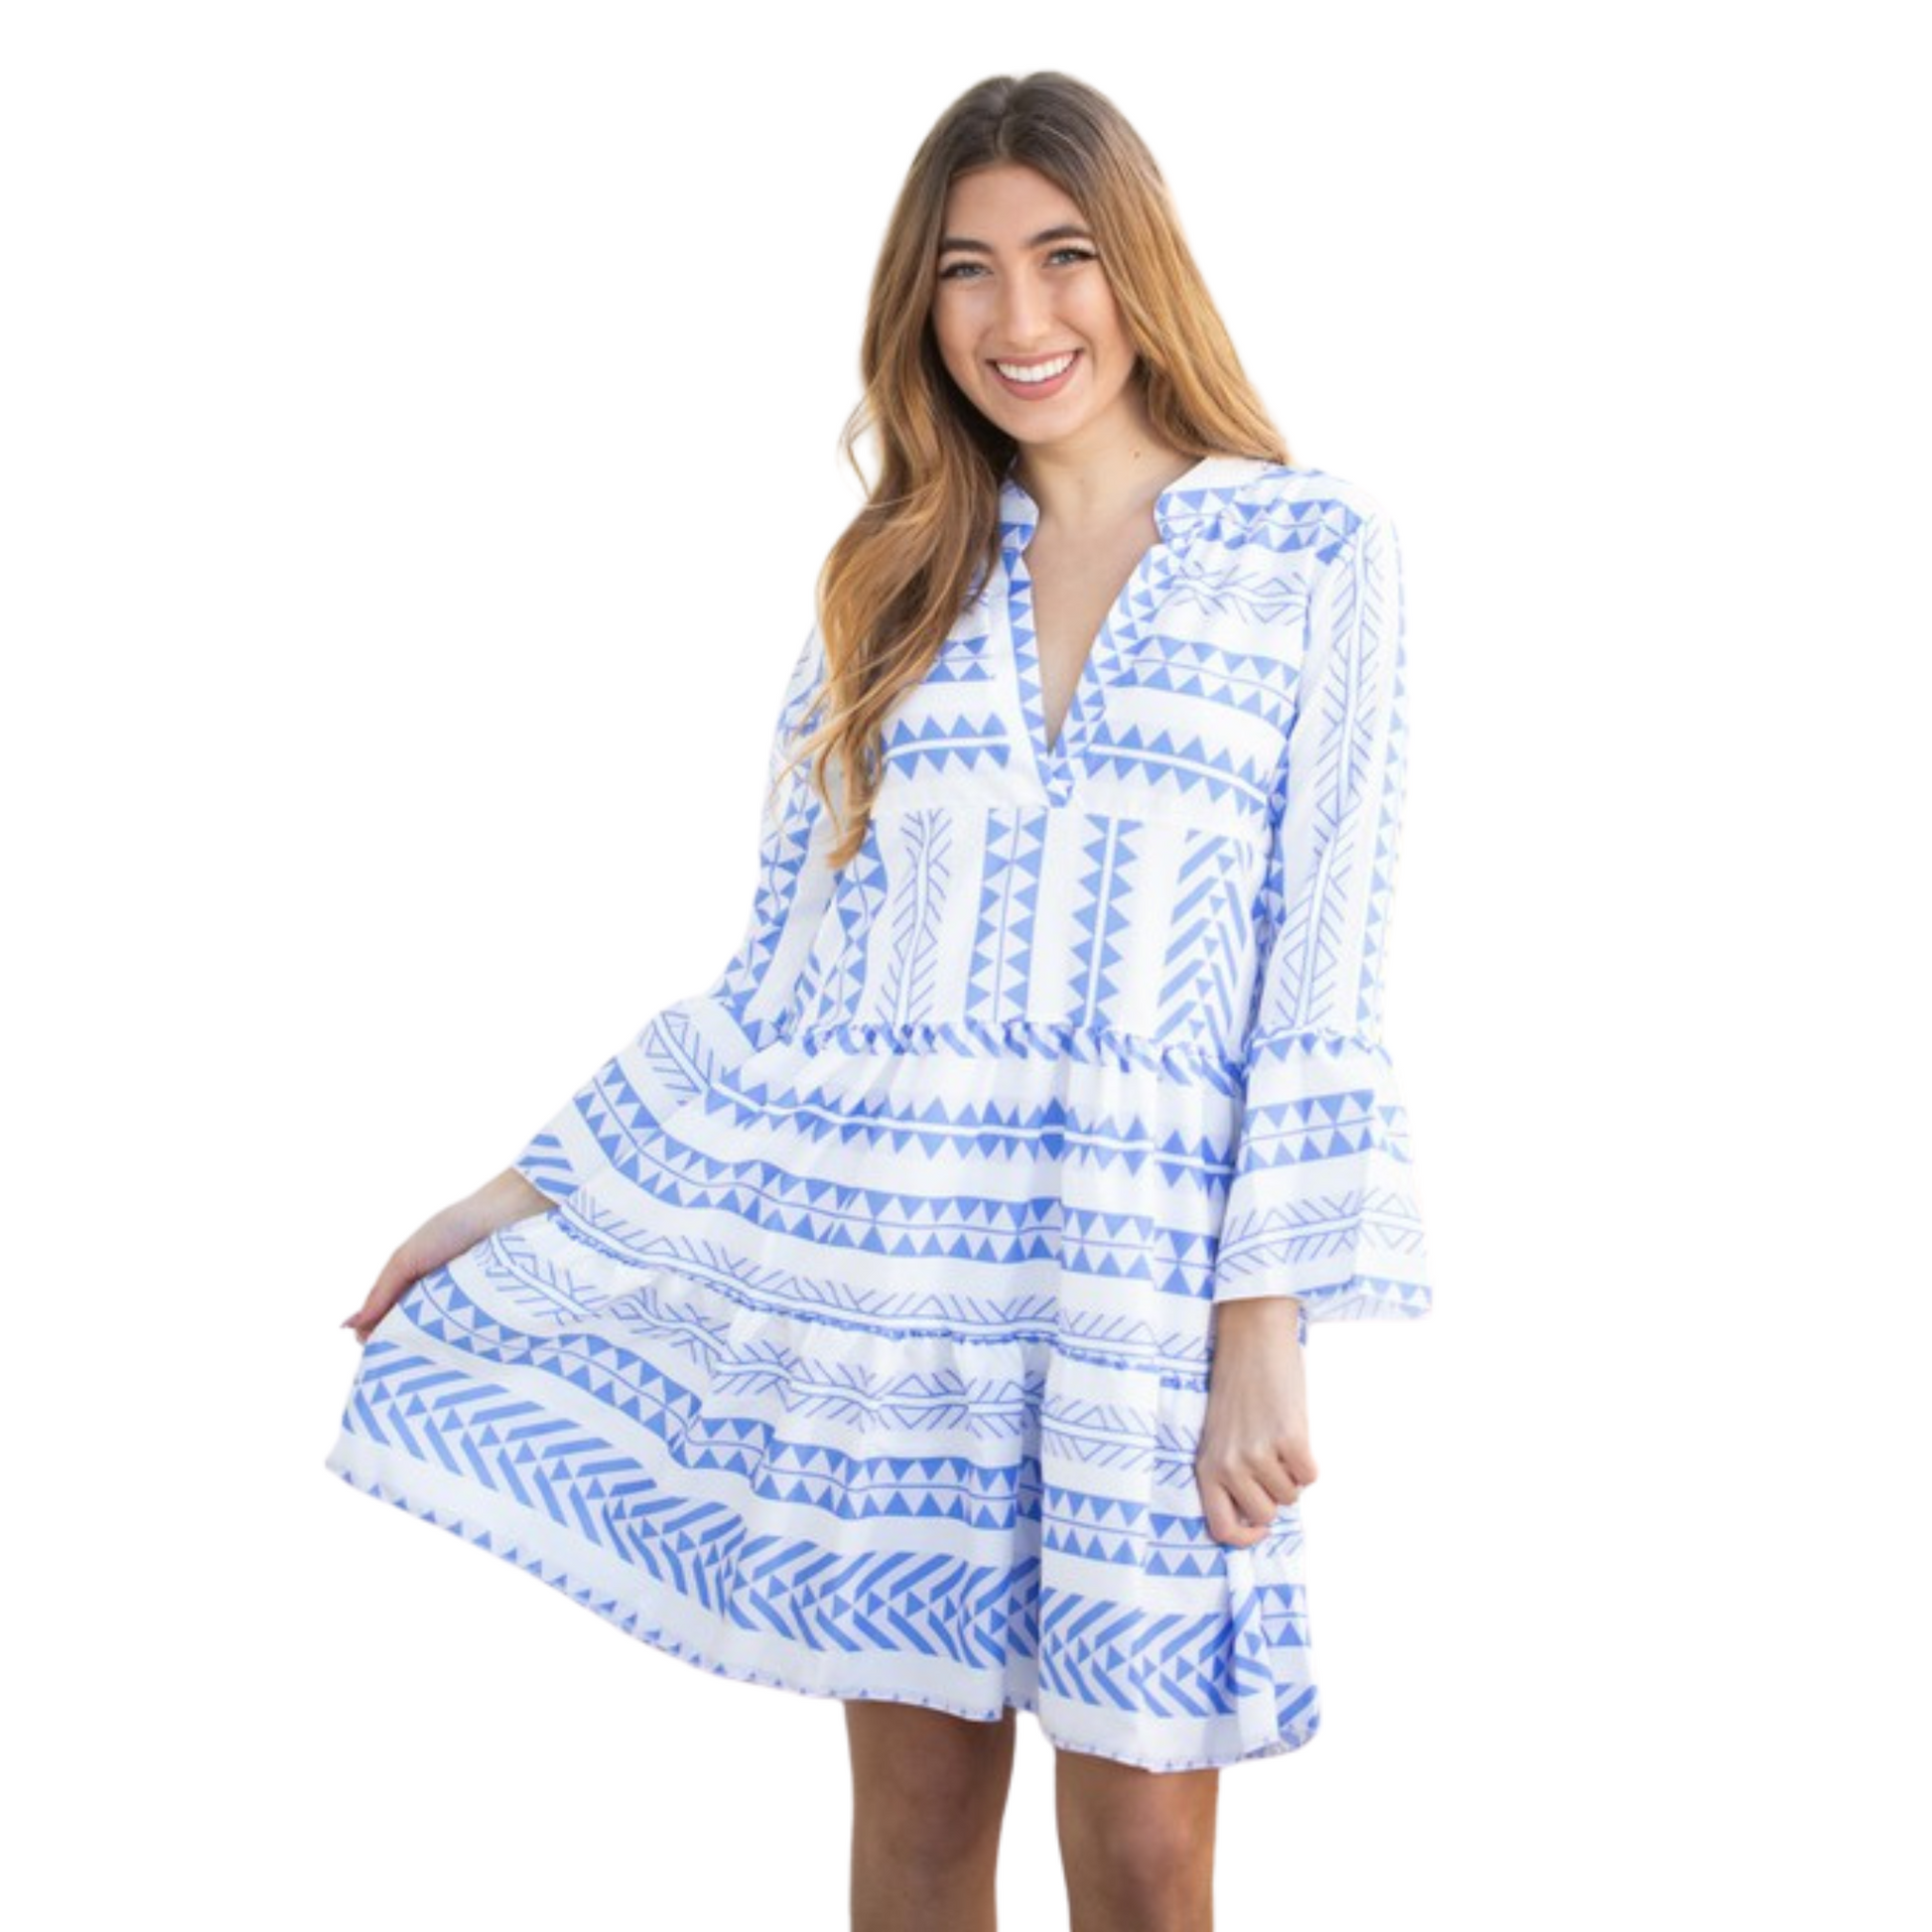 Show confidence and grace in this stylish tiered dress. The long sleeves provide arm coverage and the v neck flaunts the collarbone. The blue and white print adds a touch of subtle color, perfect for any occasion. An impeccable choice for fashion-forward ladies.